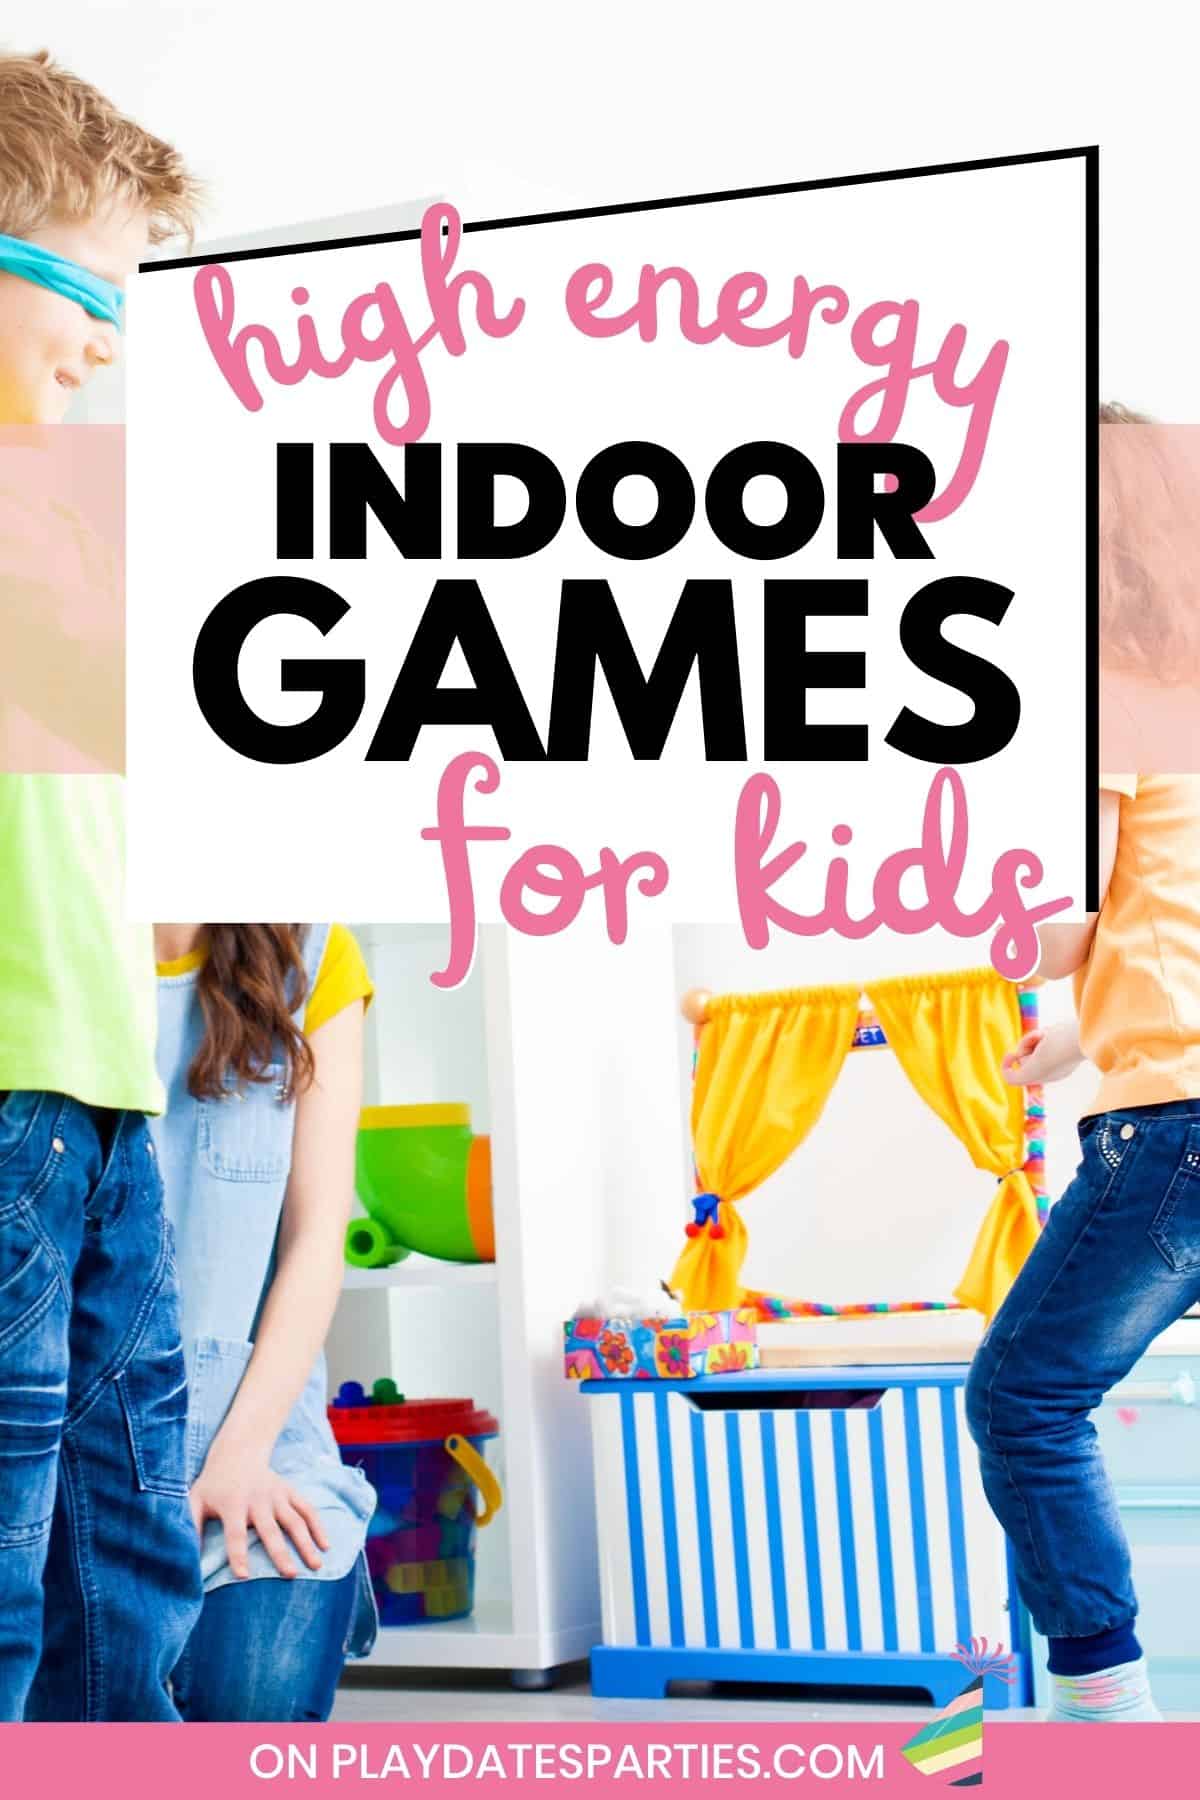 Children laughing and playing in a bright room with text overlay high energy indoor games for kids.